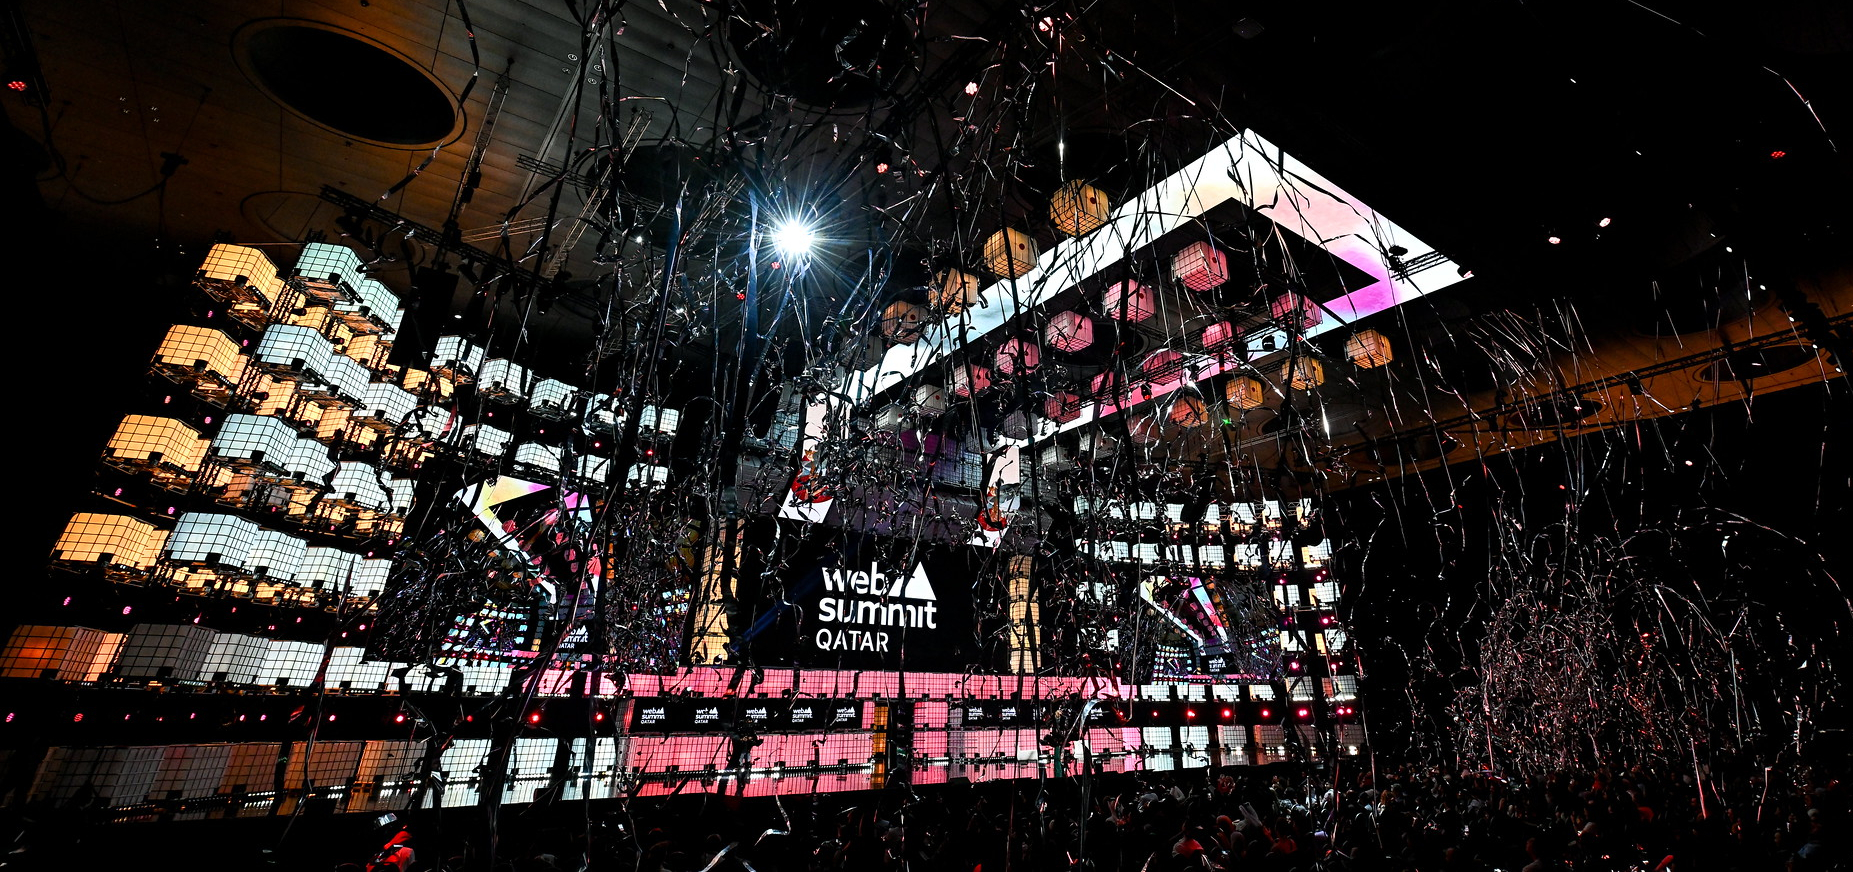 Streamers fall from an industrial ceiling above a large stage and crowded audience, viewed from the side. On the stage, a large screen shows the Web Summit Qatar logo. This is the closing ceremony of Web Summit Qatar.